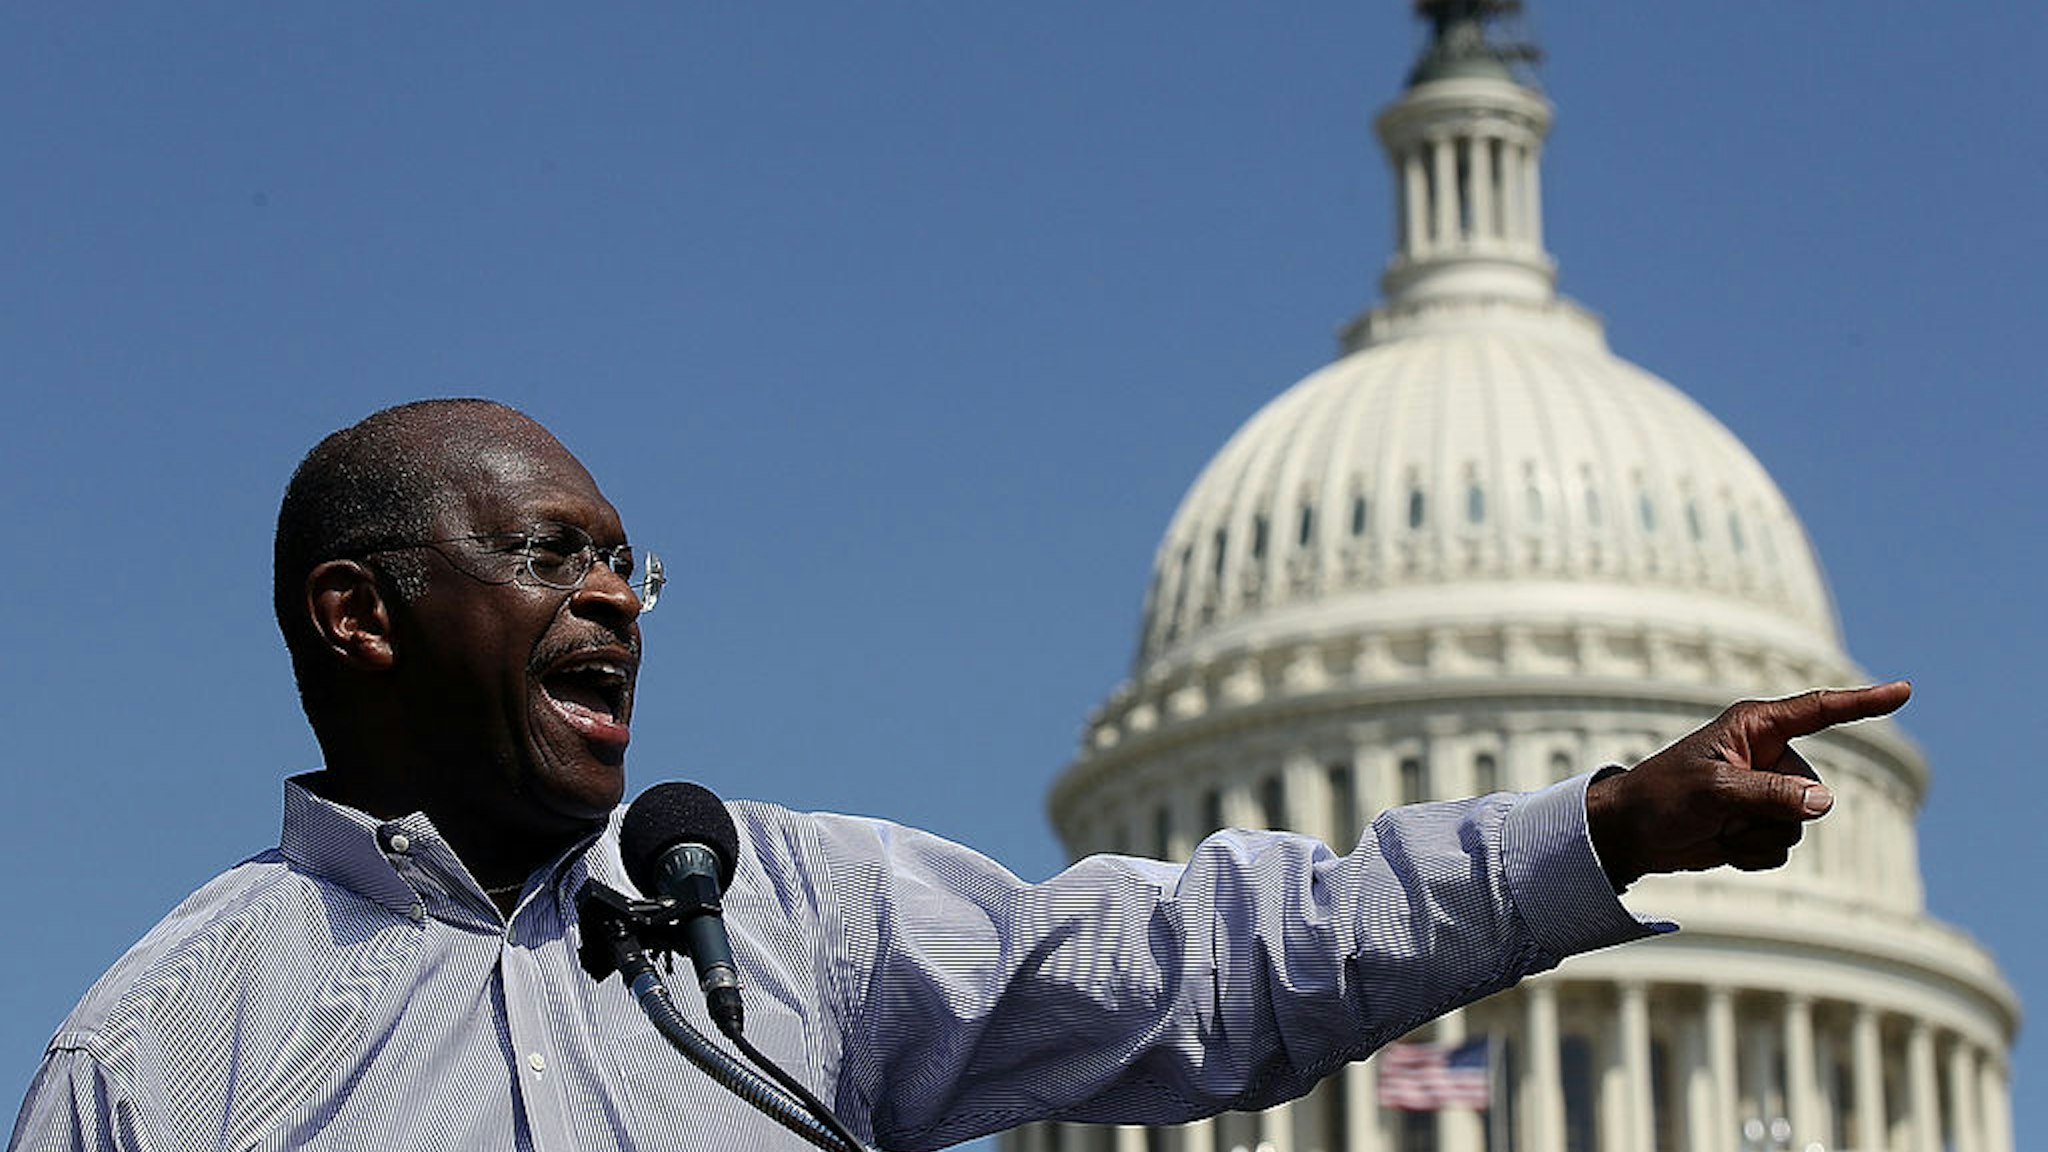 WASHINGTON, DC - APRIL 16: Former Republican presidential candidate Herman Cain speaks at the "Cain's Revolution on the Hill" Tax Day Rally at the U.S. Capitol April 16, 2012 in Washington, DC. Cain spent the day promoting his 9-9-9 tax code plan in advance of tomorrow, the day that Americans are required to file their income taxes this year. (Photo by